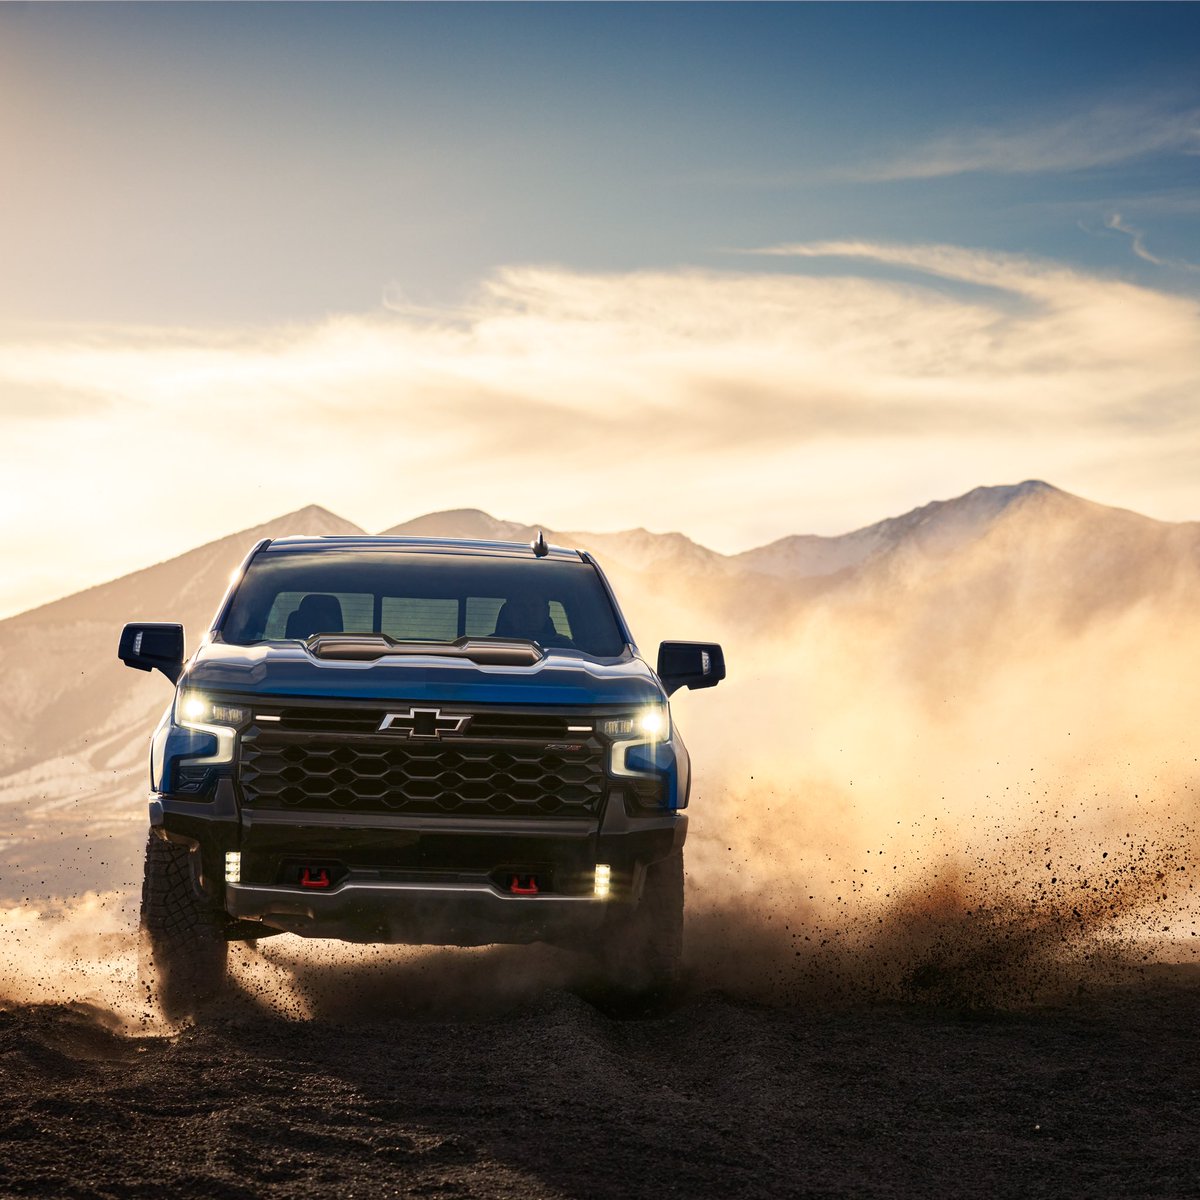 For any road life takes you down — especially when it isn’t on a map. #Silverado #ZR2